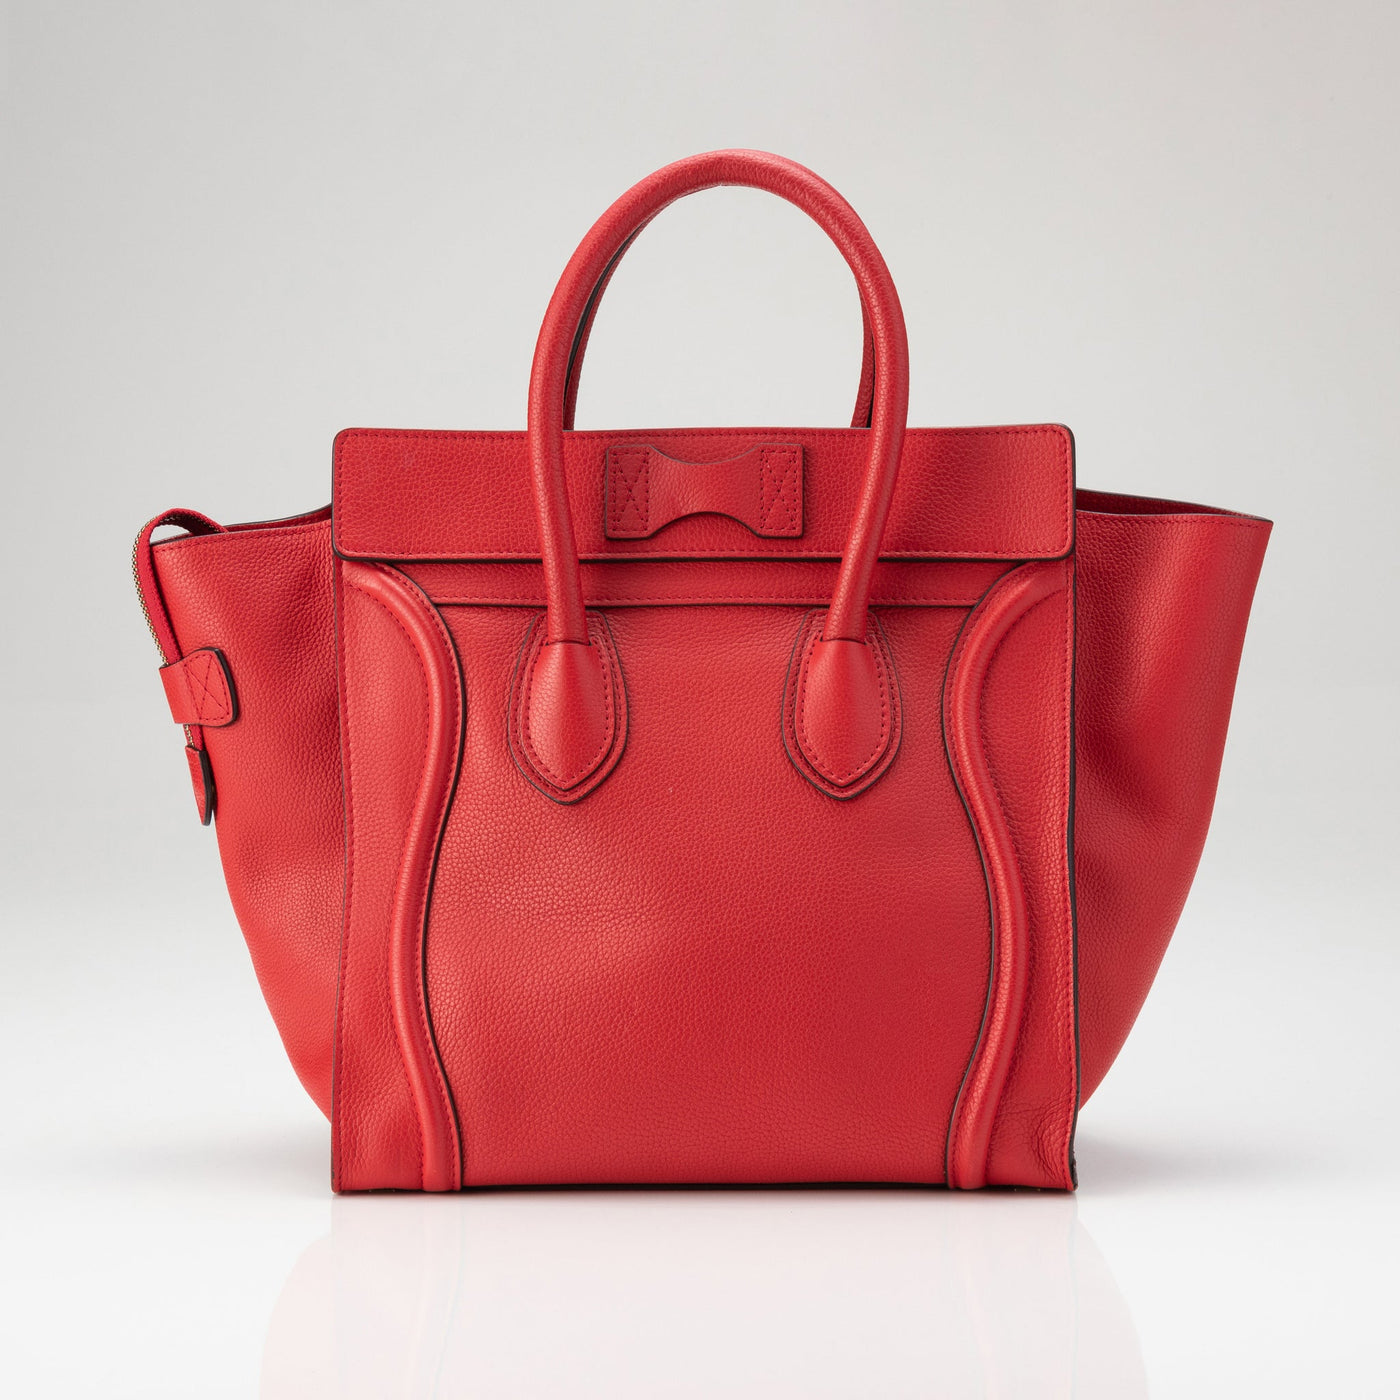 CELINE ラゲッジ マイクロショッパー RED